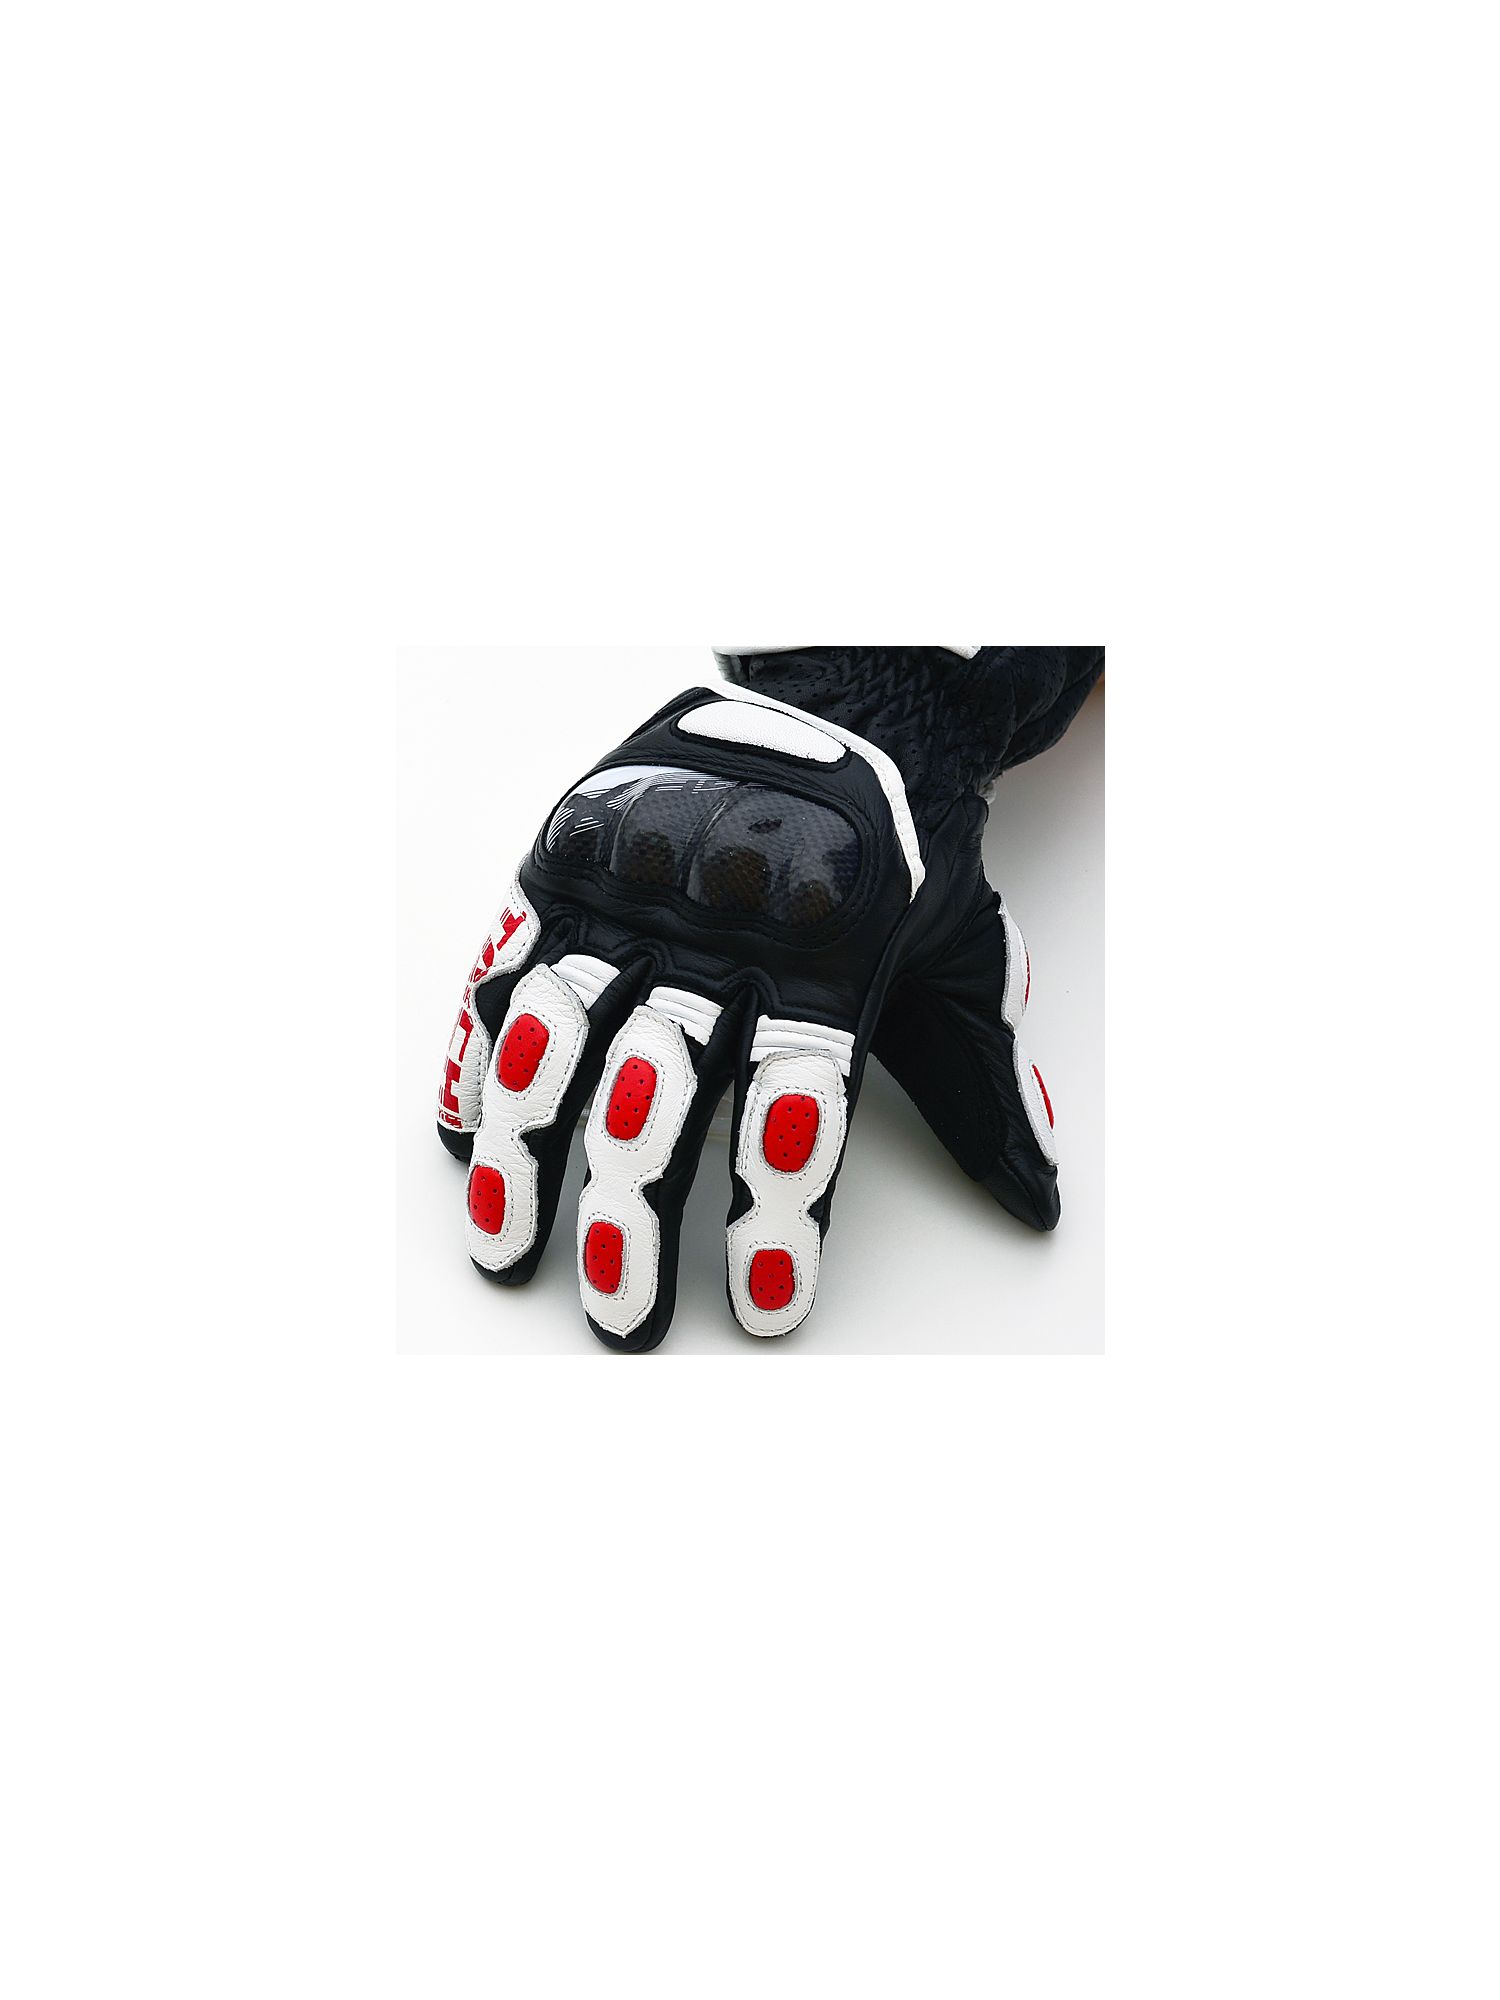 NXT053 | GP-X RACING GLOVES［4colors］